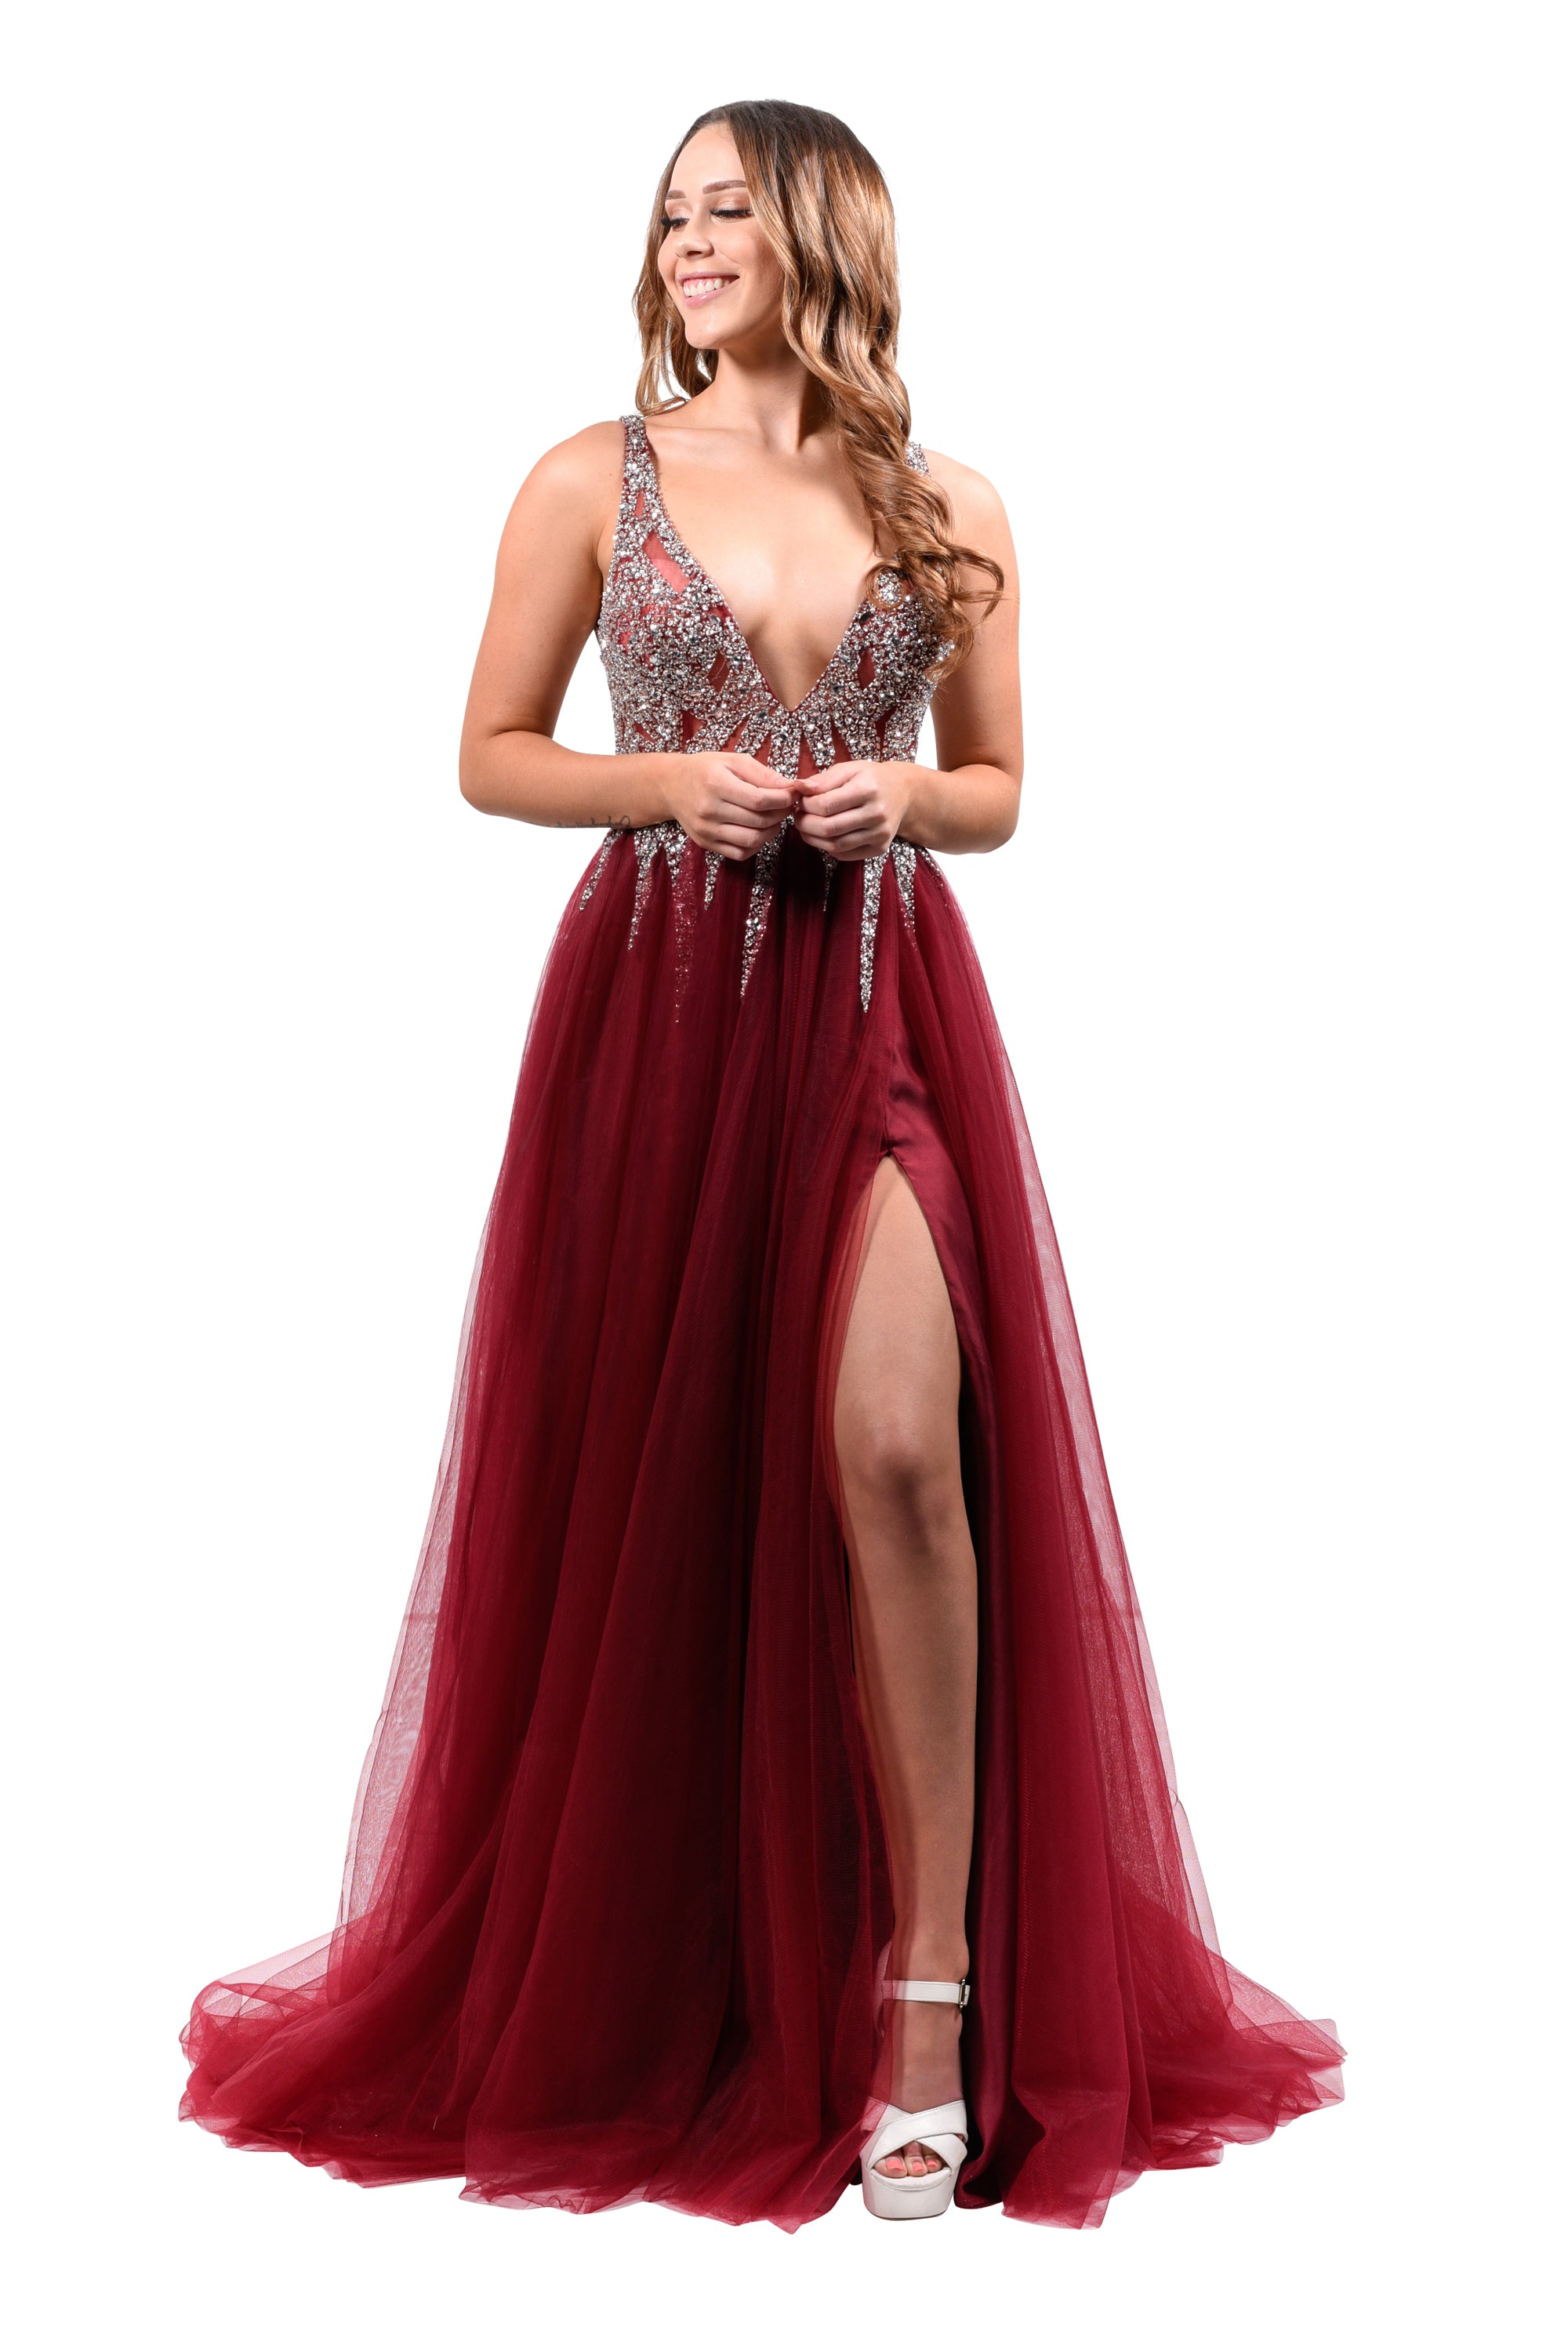 Honey Couture LINA Crystal Tulle Formal Gown Private Label$ AfterPay Humm ZipPay LayBuy Sezzle